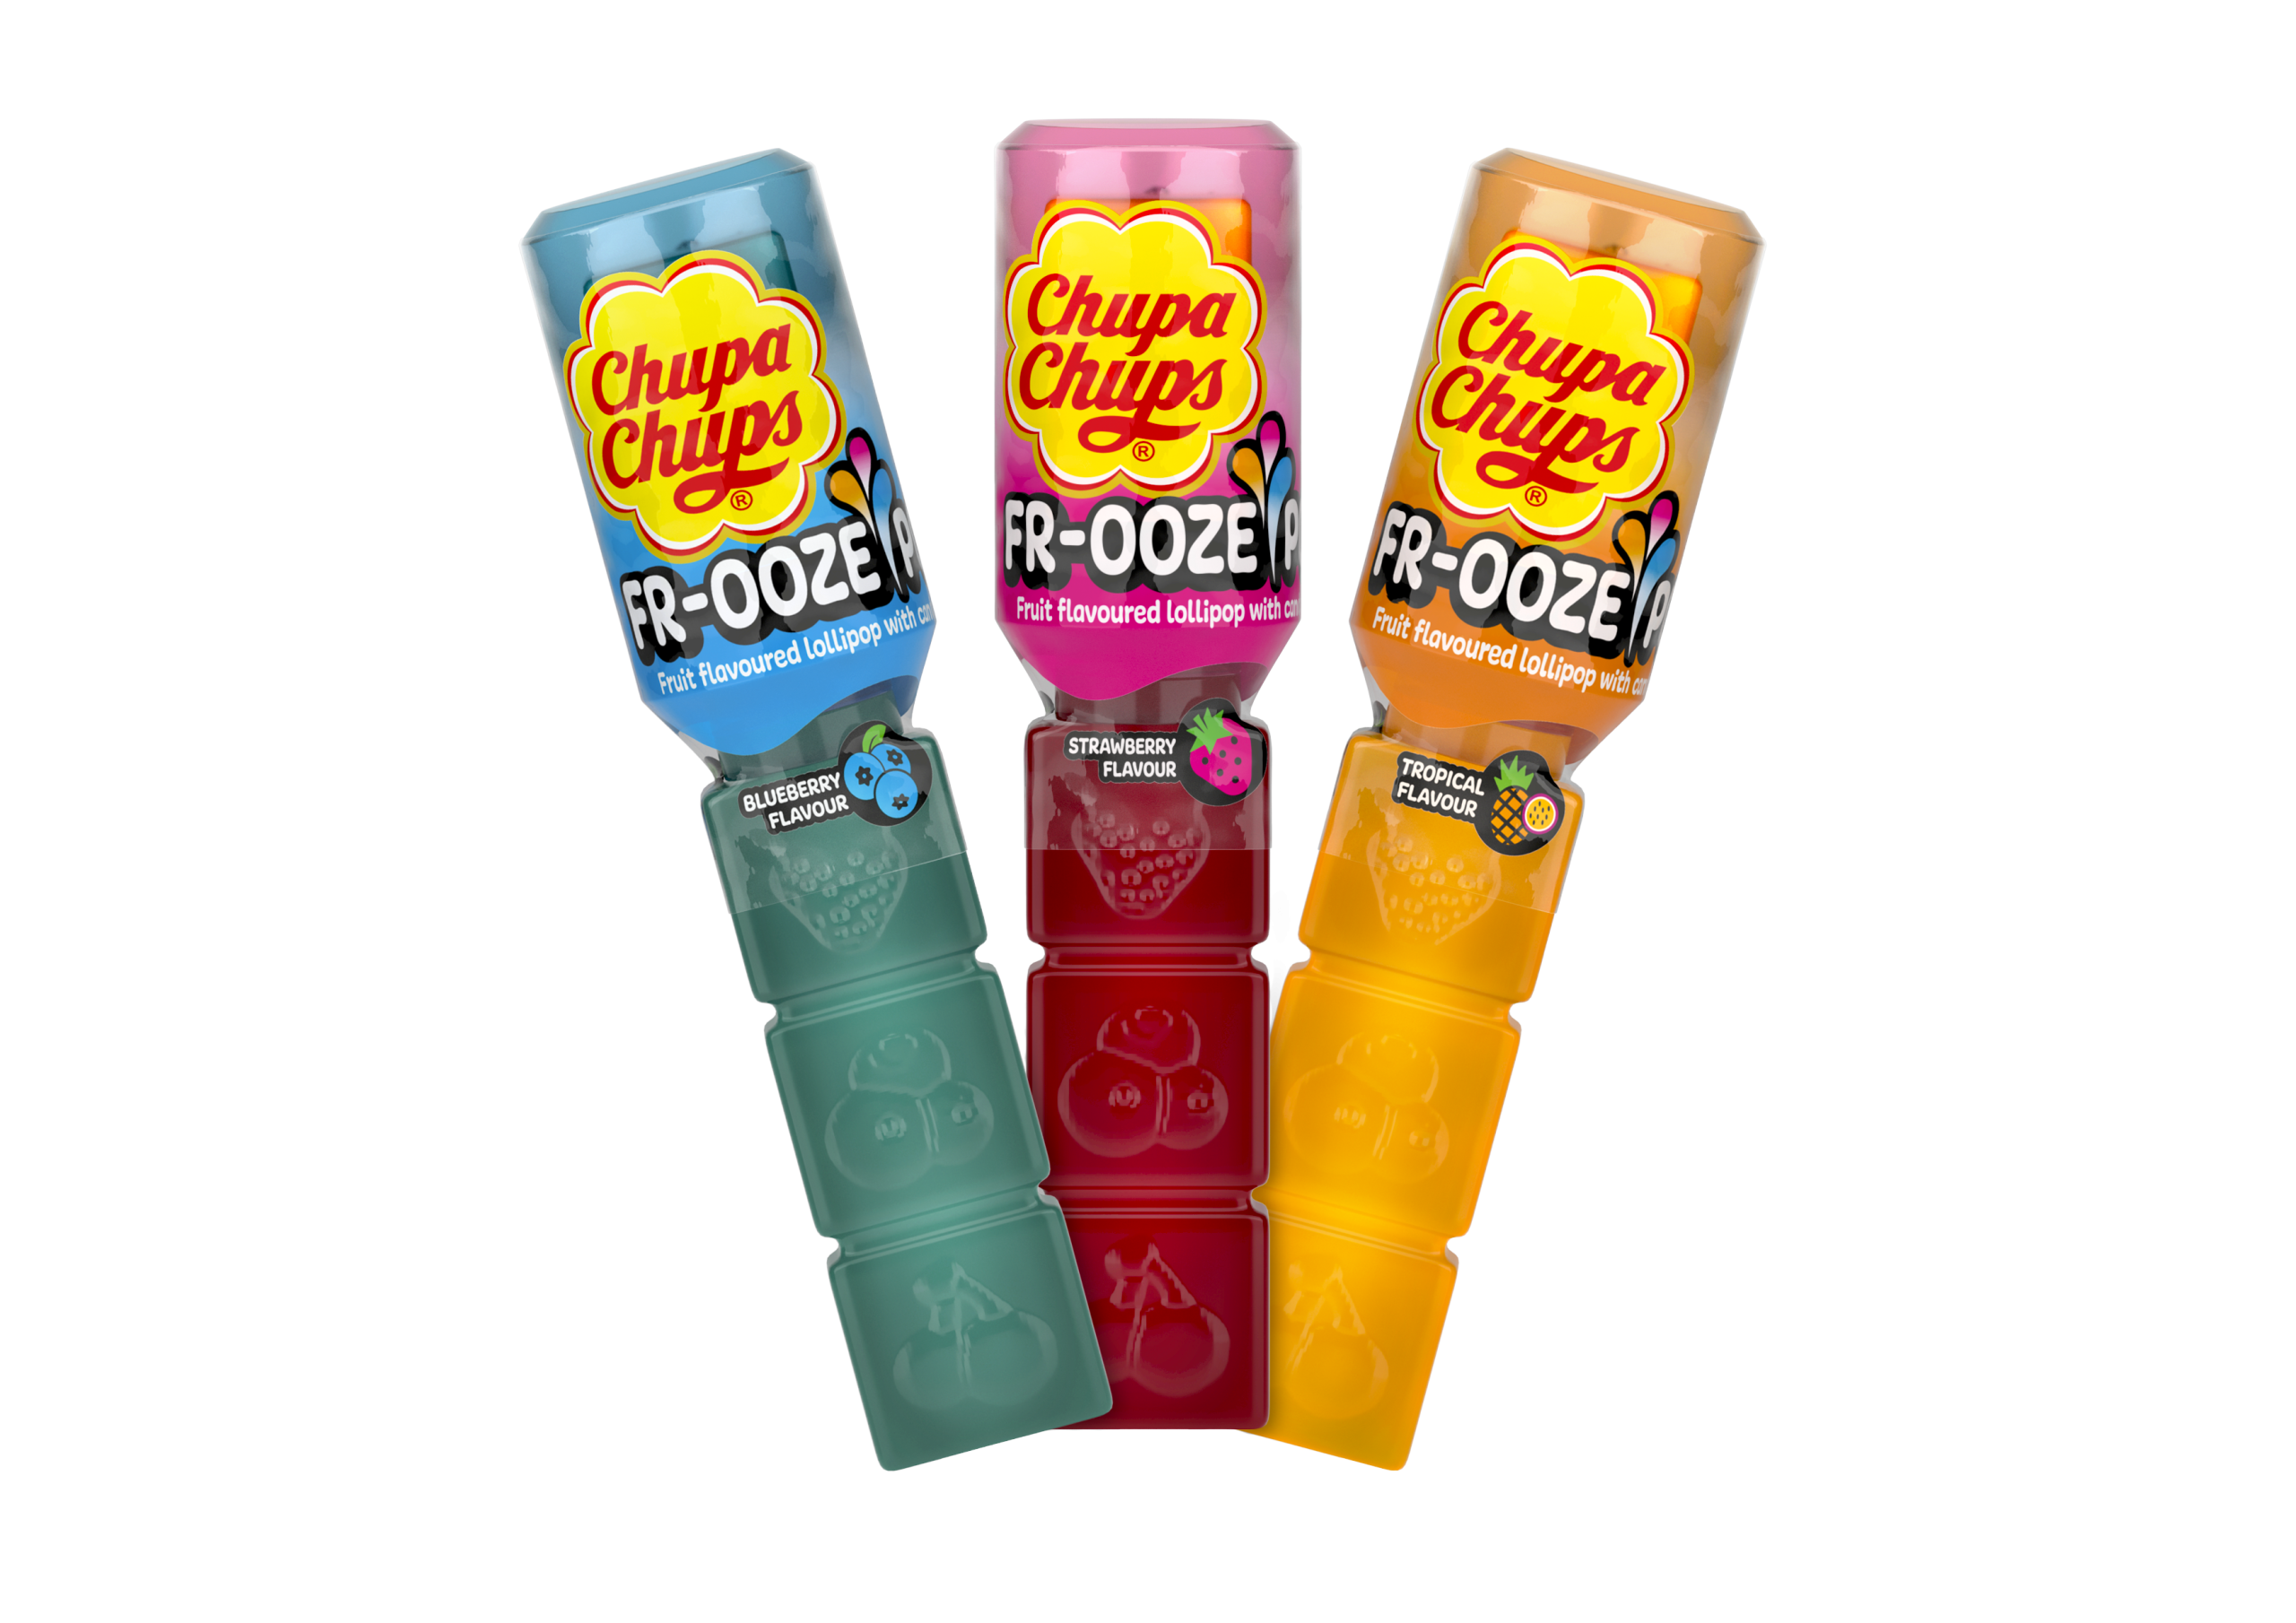 Chupa Chups ‘froozes out’ competition with launch of oozing candy lollipop